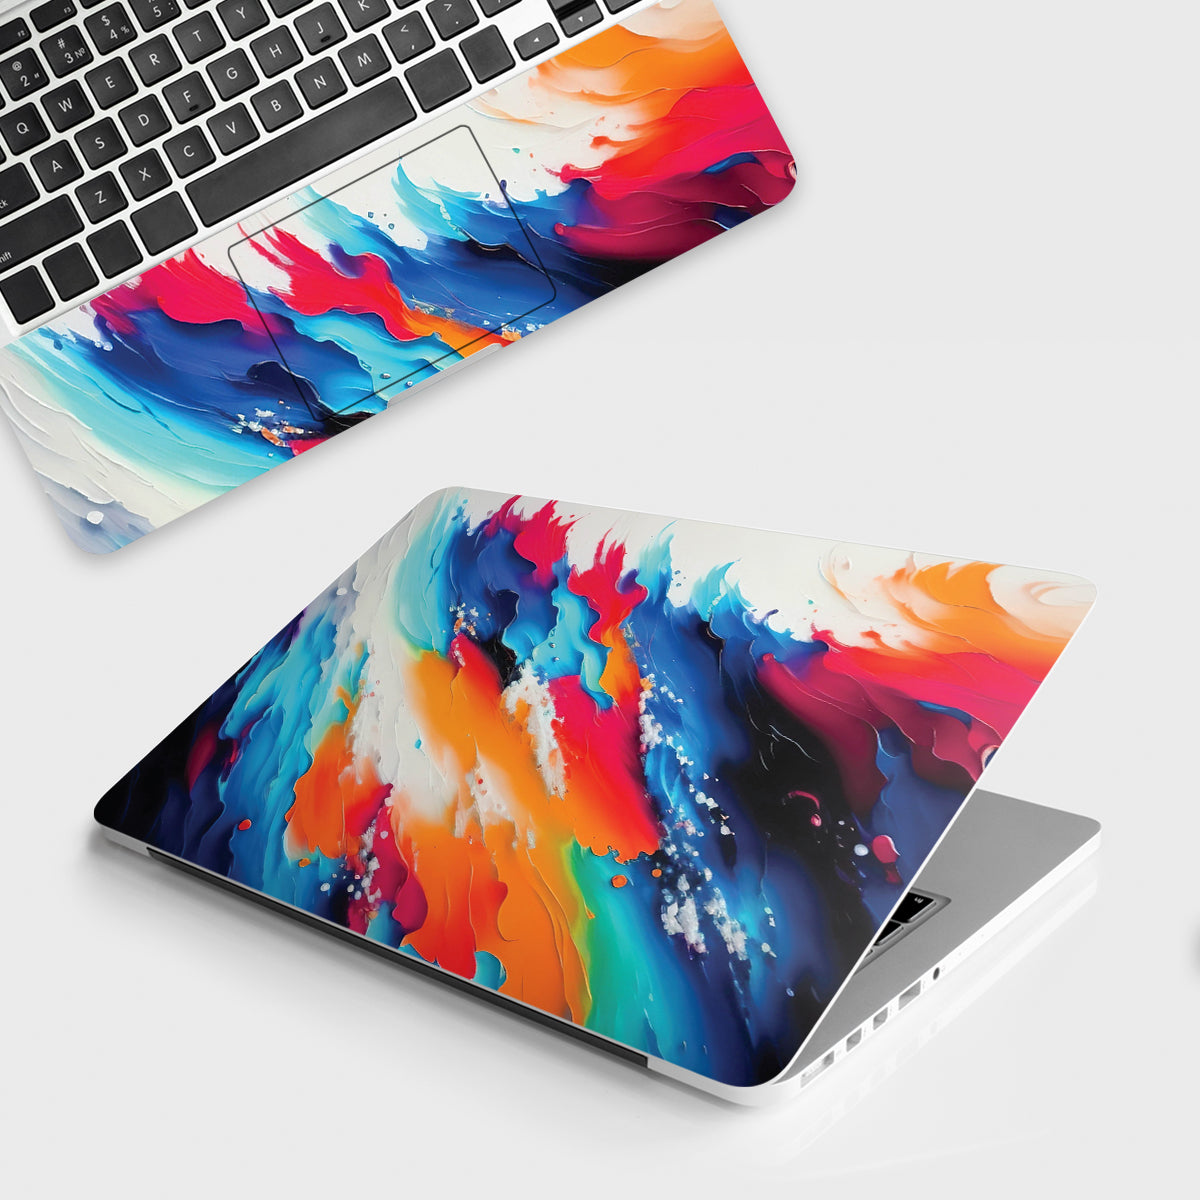 Fomo Store Laptop Skins Abstract Colorful Clouds